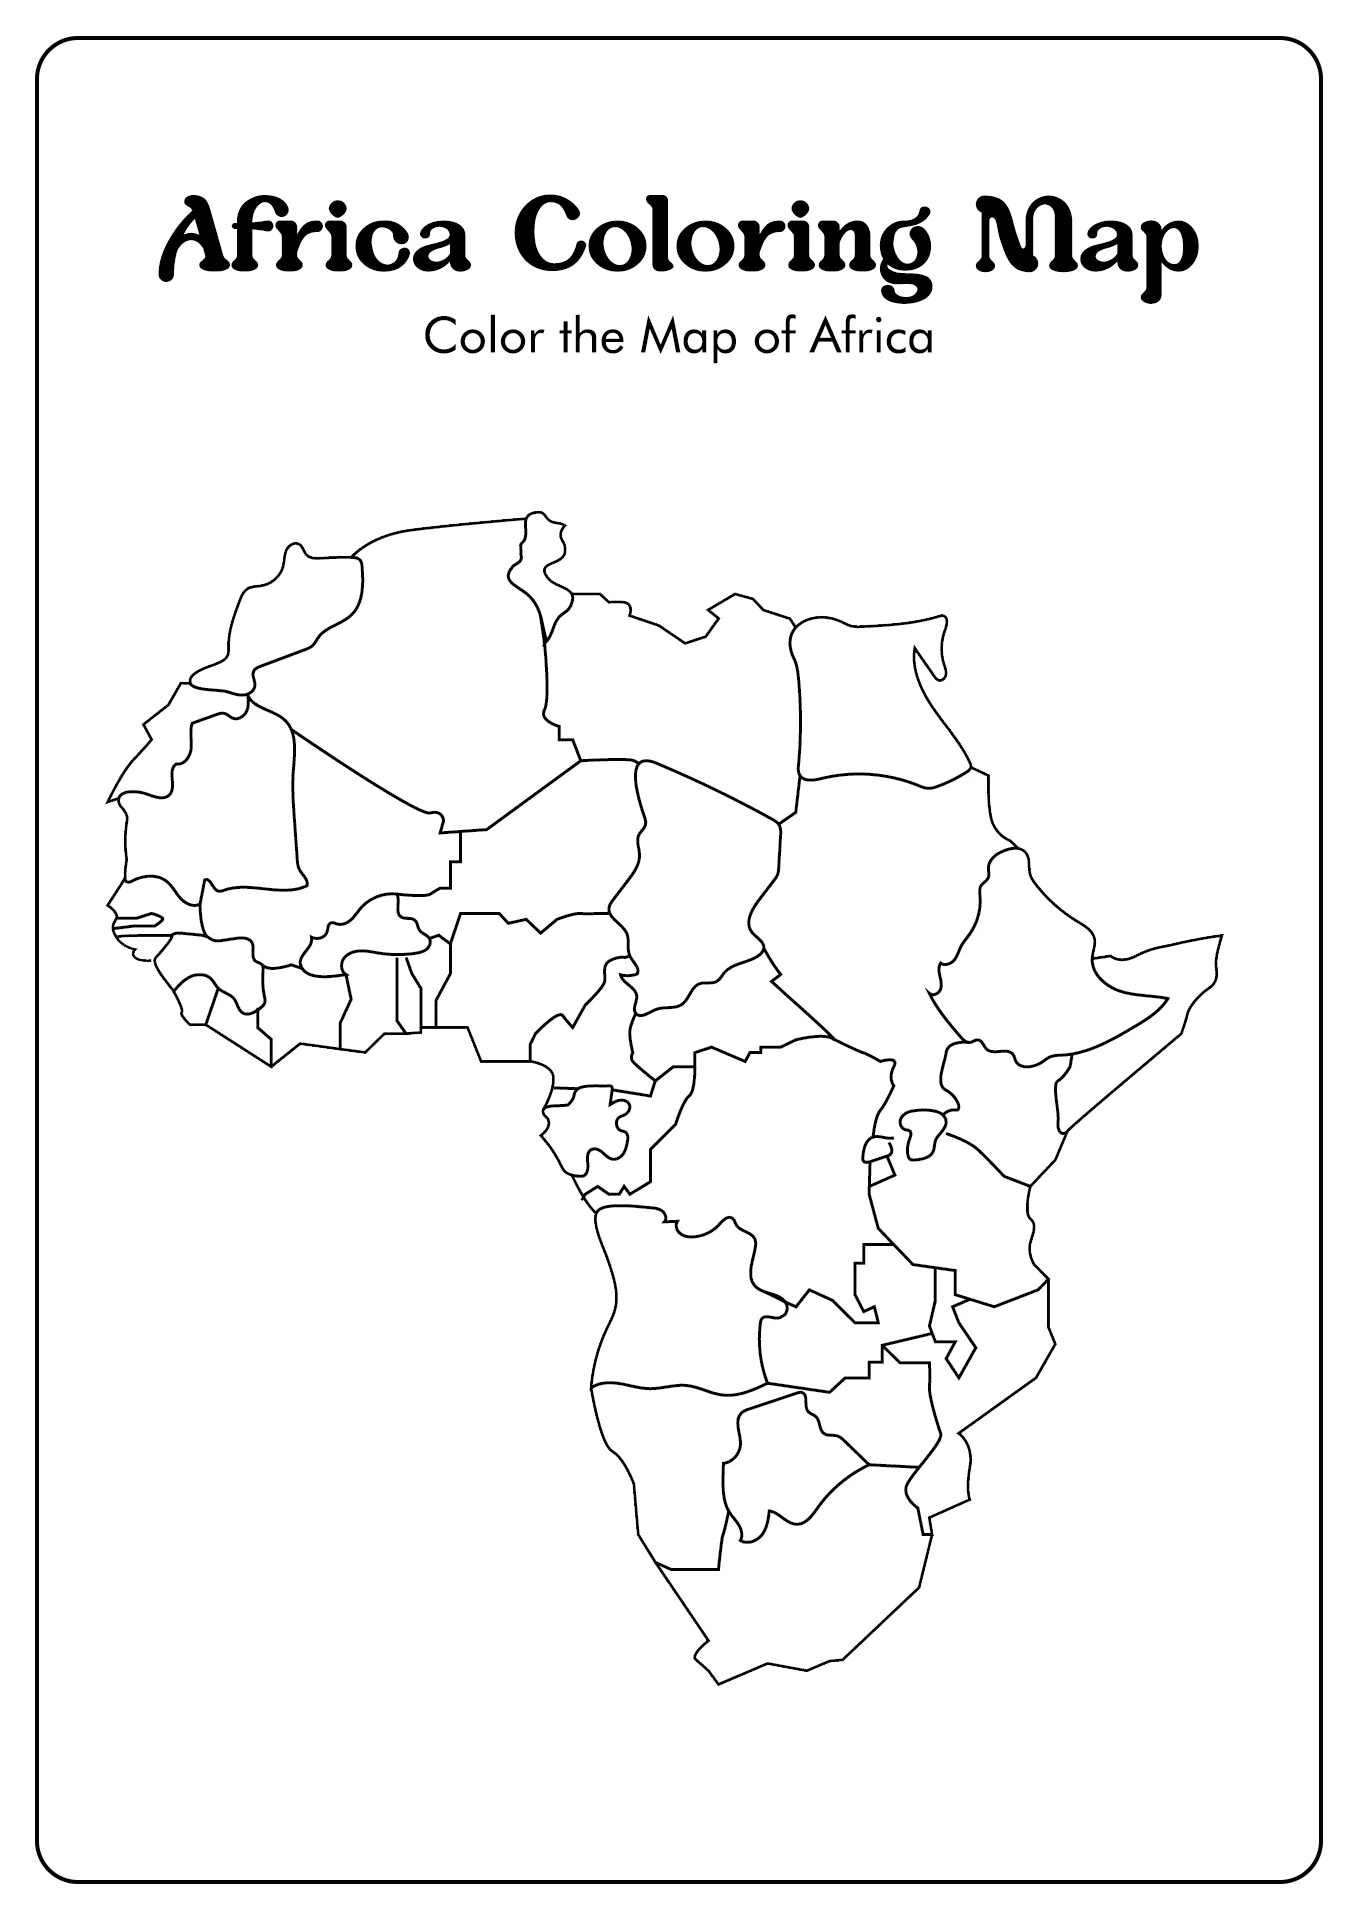 Maps Of Africa Coloring Pages African Maps Images